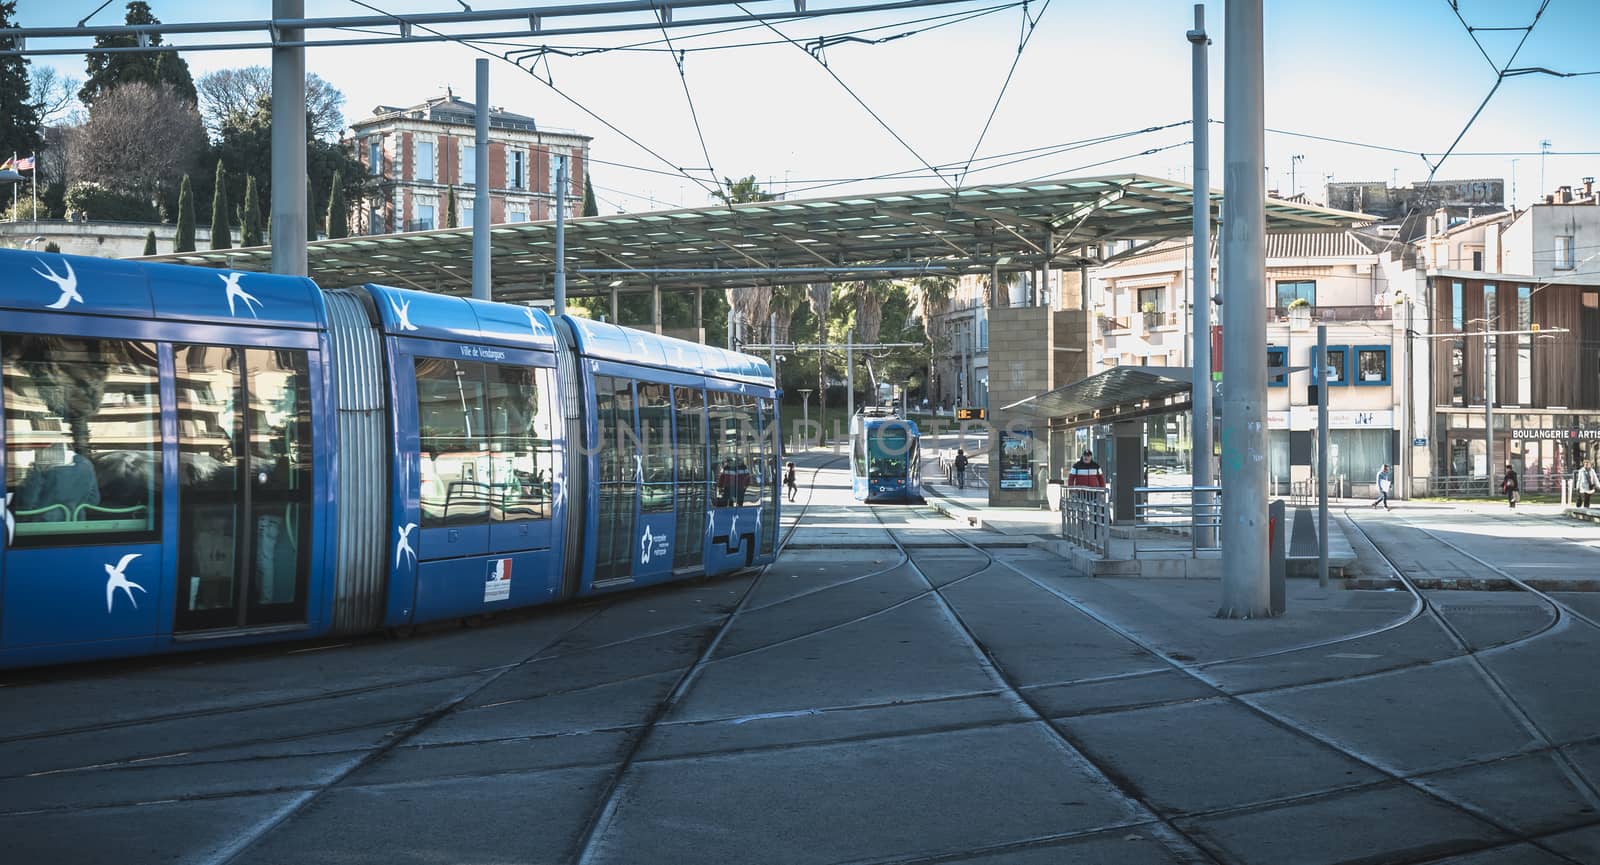 electric tramway passing the Corum, a convention center and Oper by AtlanticEUROSTOXX